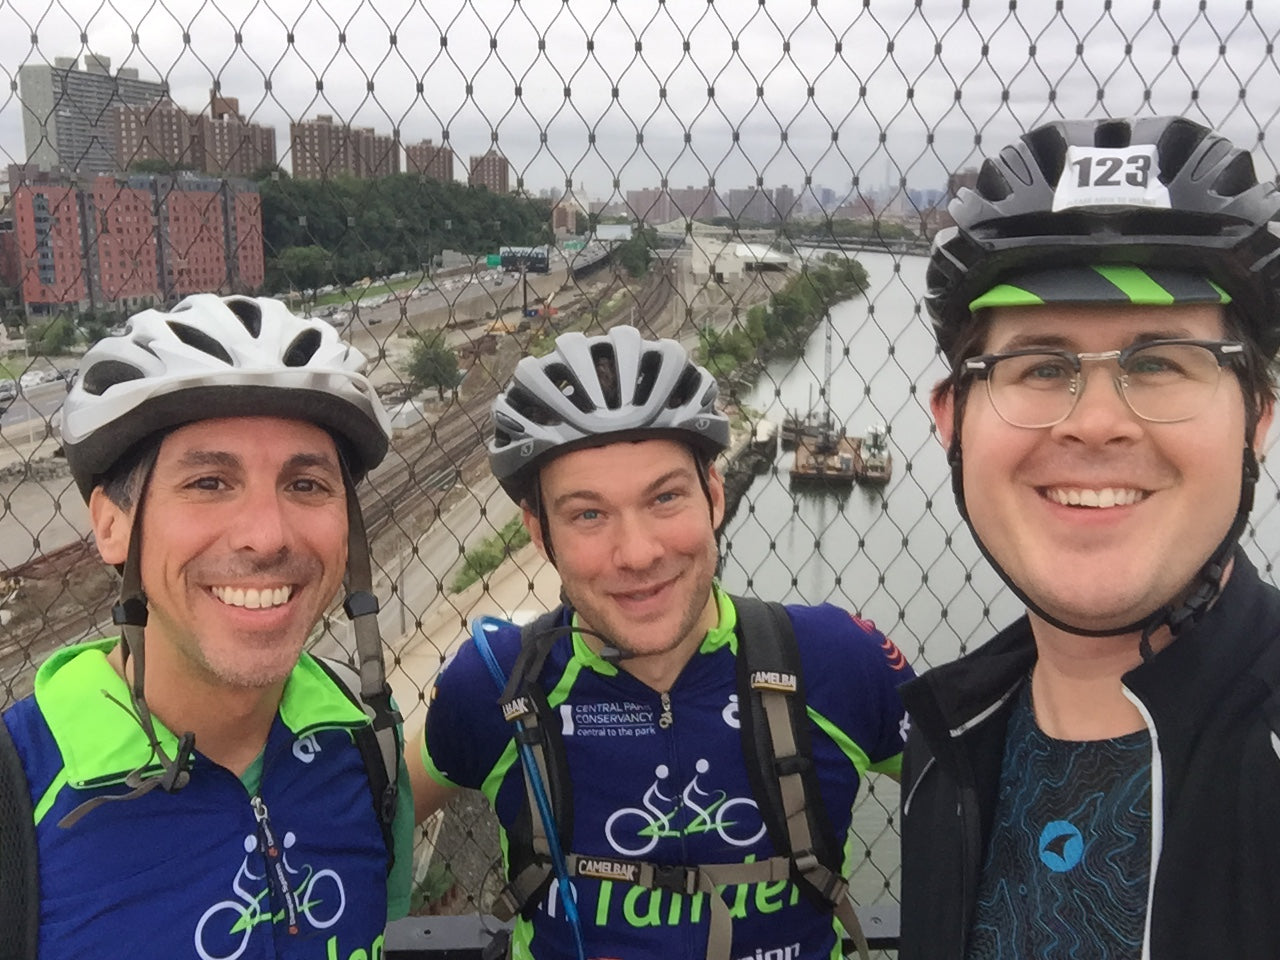 Tim O'Neal - Checking routes to make sure they are safe for tandem teams is done before every major ride. I joined Matthew Nidek (left), Executive Director of InTandem, and Jonathan Epstein (Center), Director of Operations for a scouting ride in drizzly w